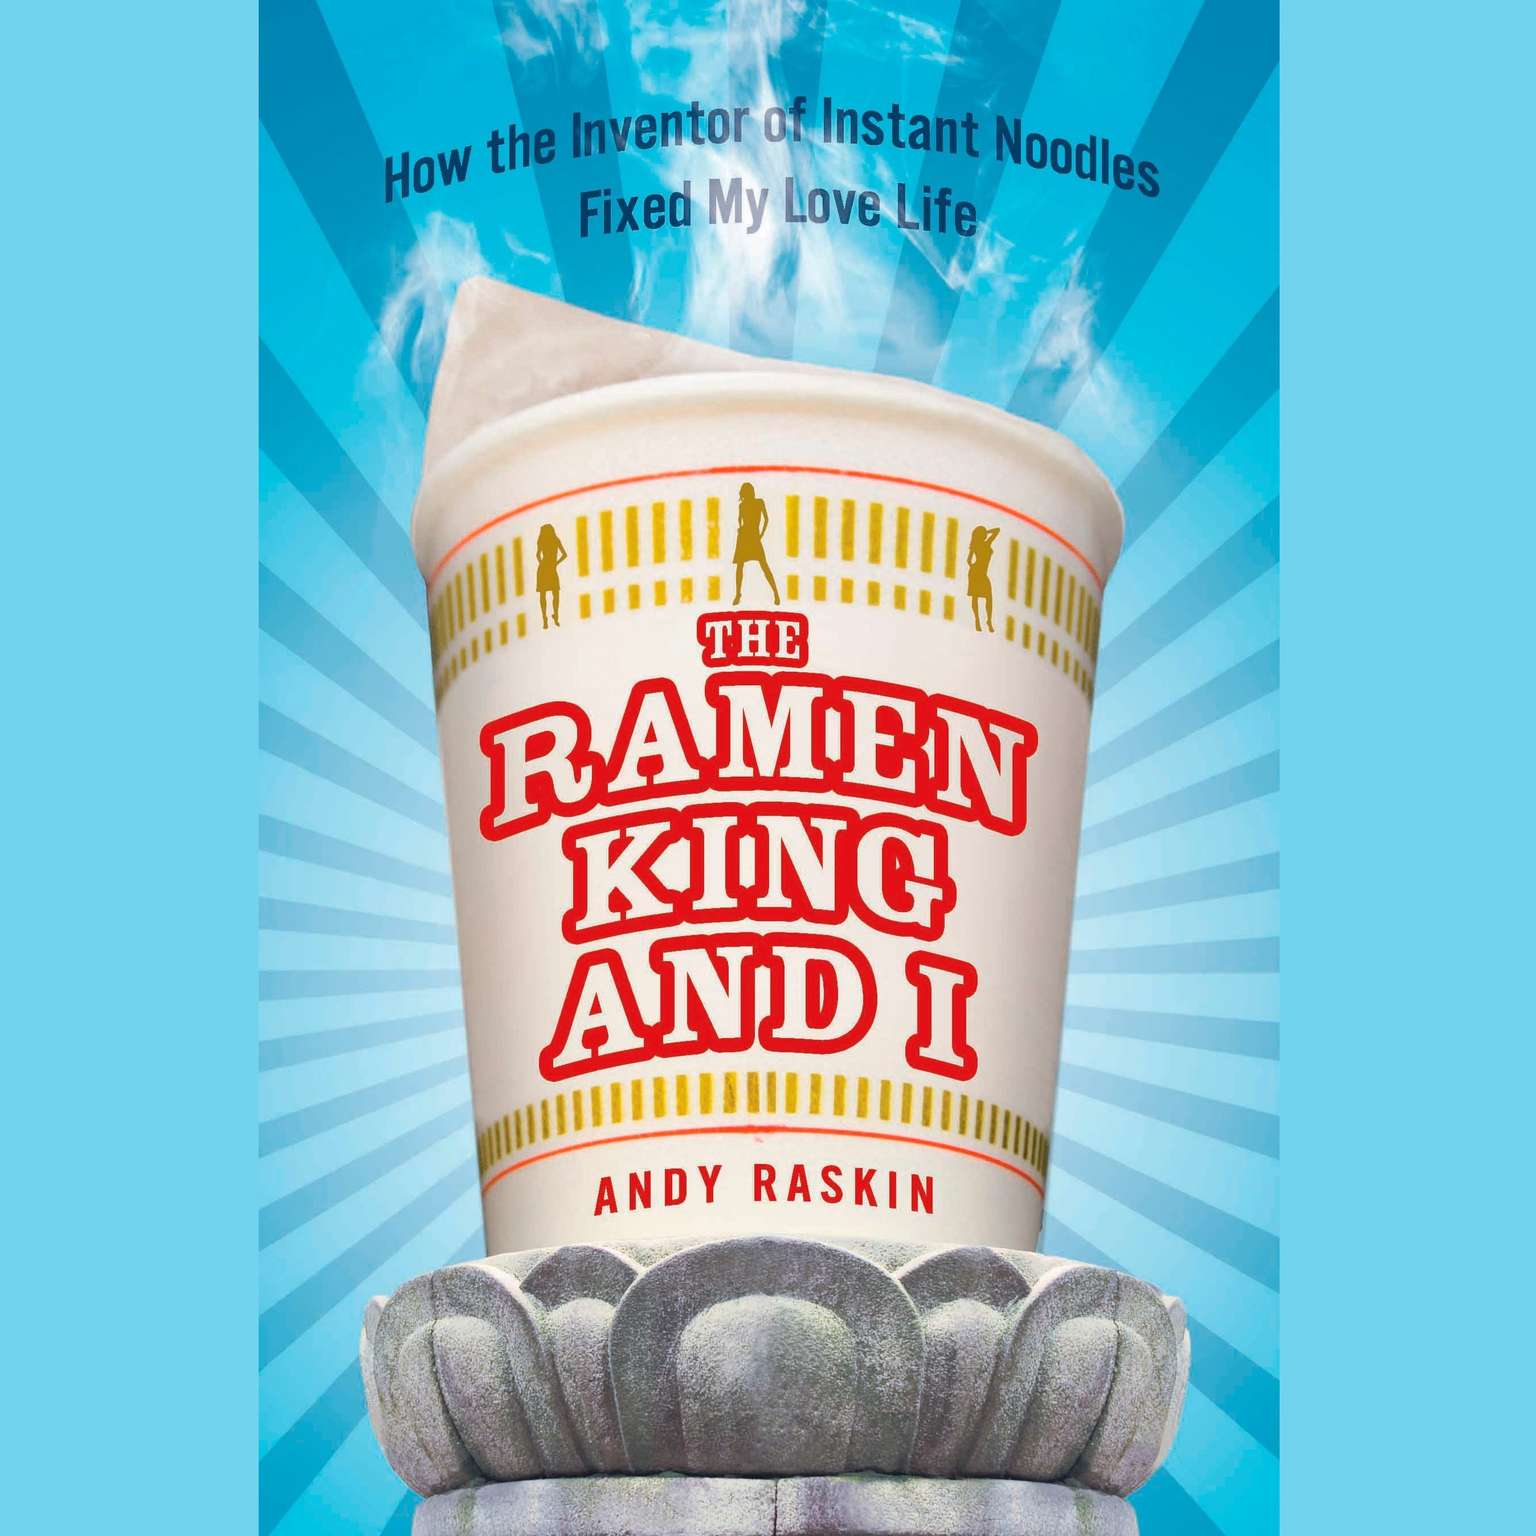 The Ramen King and I: How the Inventor of Instant Noodles Fixed My Love Life Audiobook, by Andy Raskin